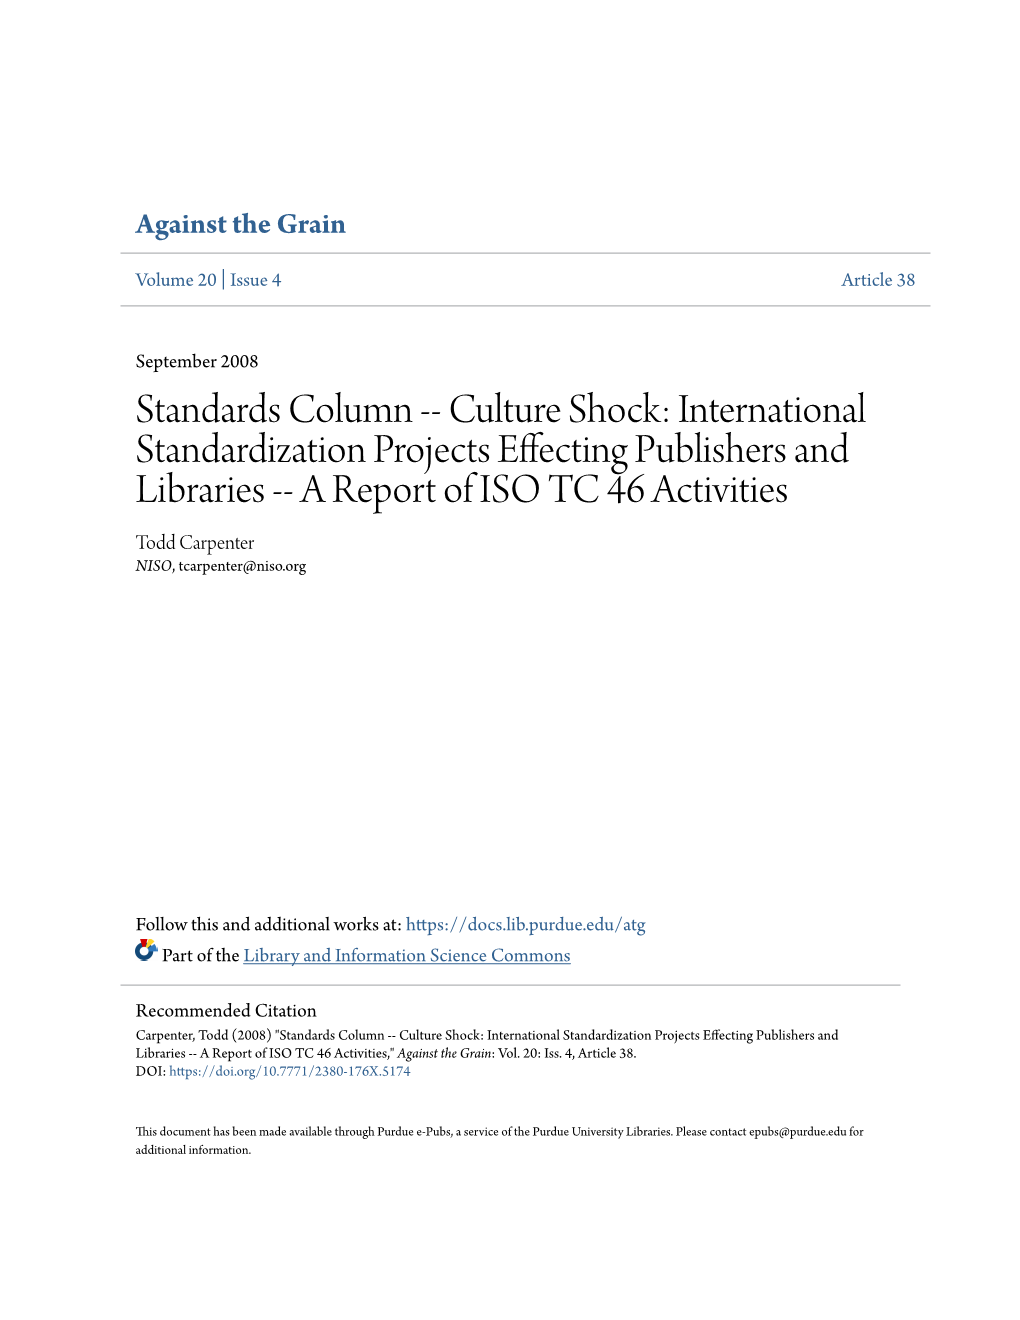 International Standardization Projects Effecting Publishers and Libraries -- a Report of ISO TC 46 Activities Todd Carpenter NISO, Tcarpenter@Niso.Org